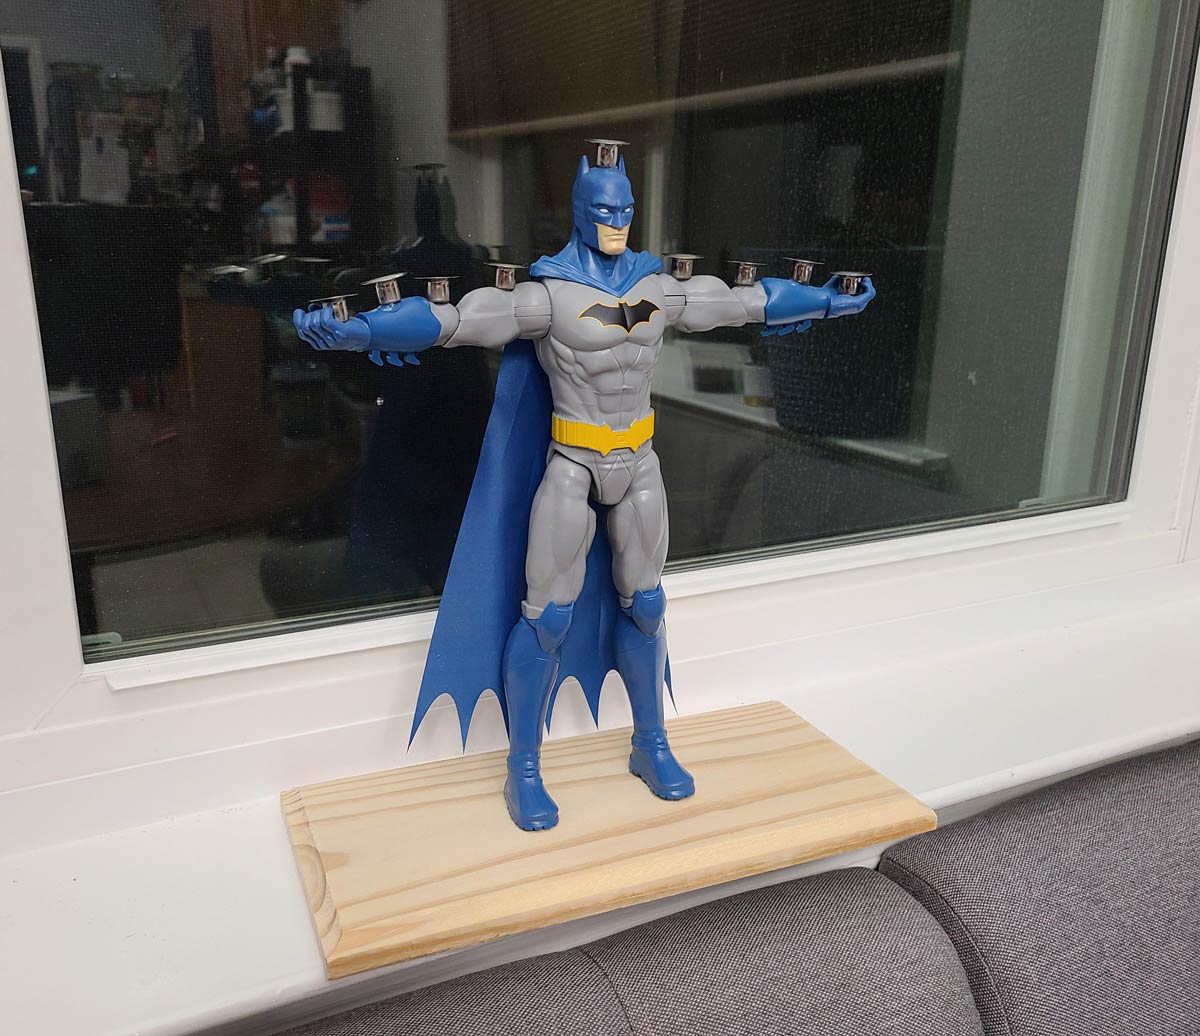 Every year I try to make a new Menorah. I present this year's addition "Batmanorah"